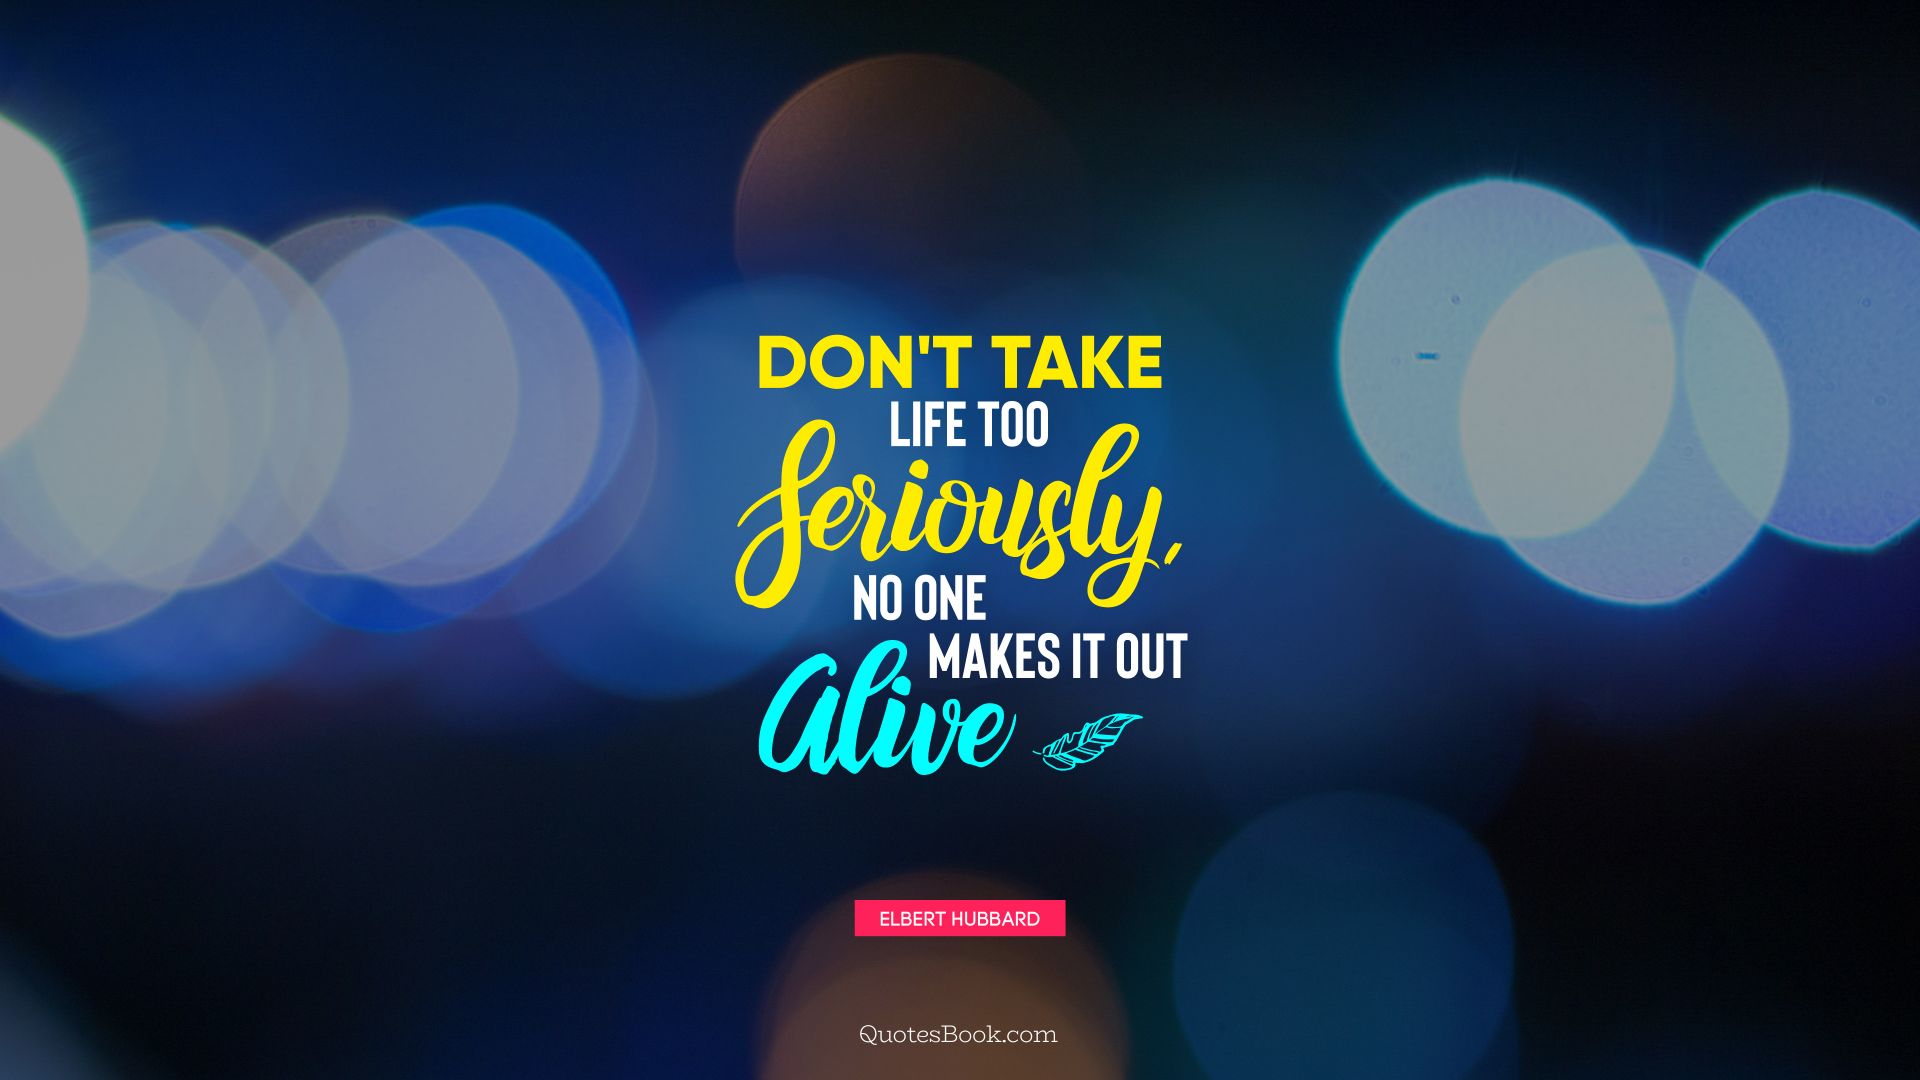 Don't take life too seriously, no one makes it out alive. - Quote by Elbert Hubbard